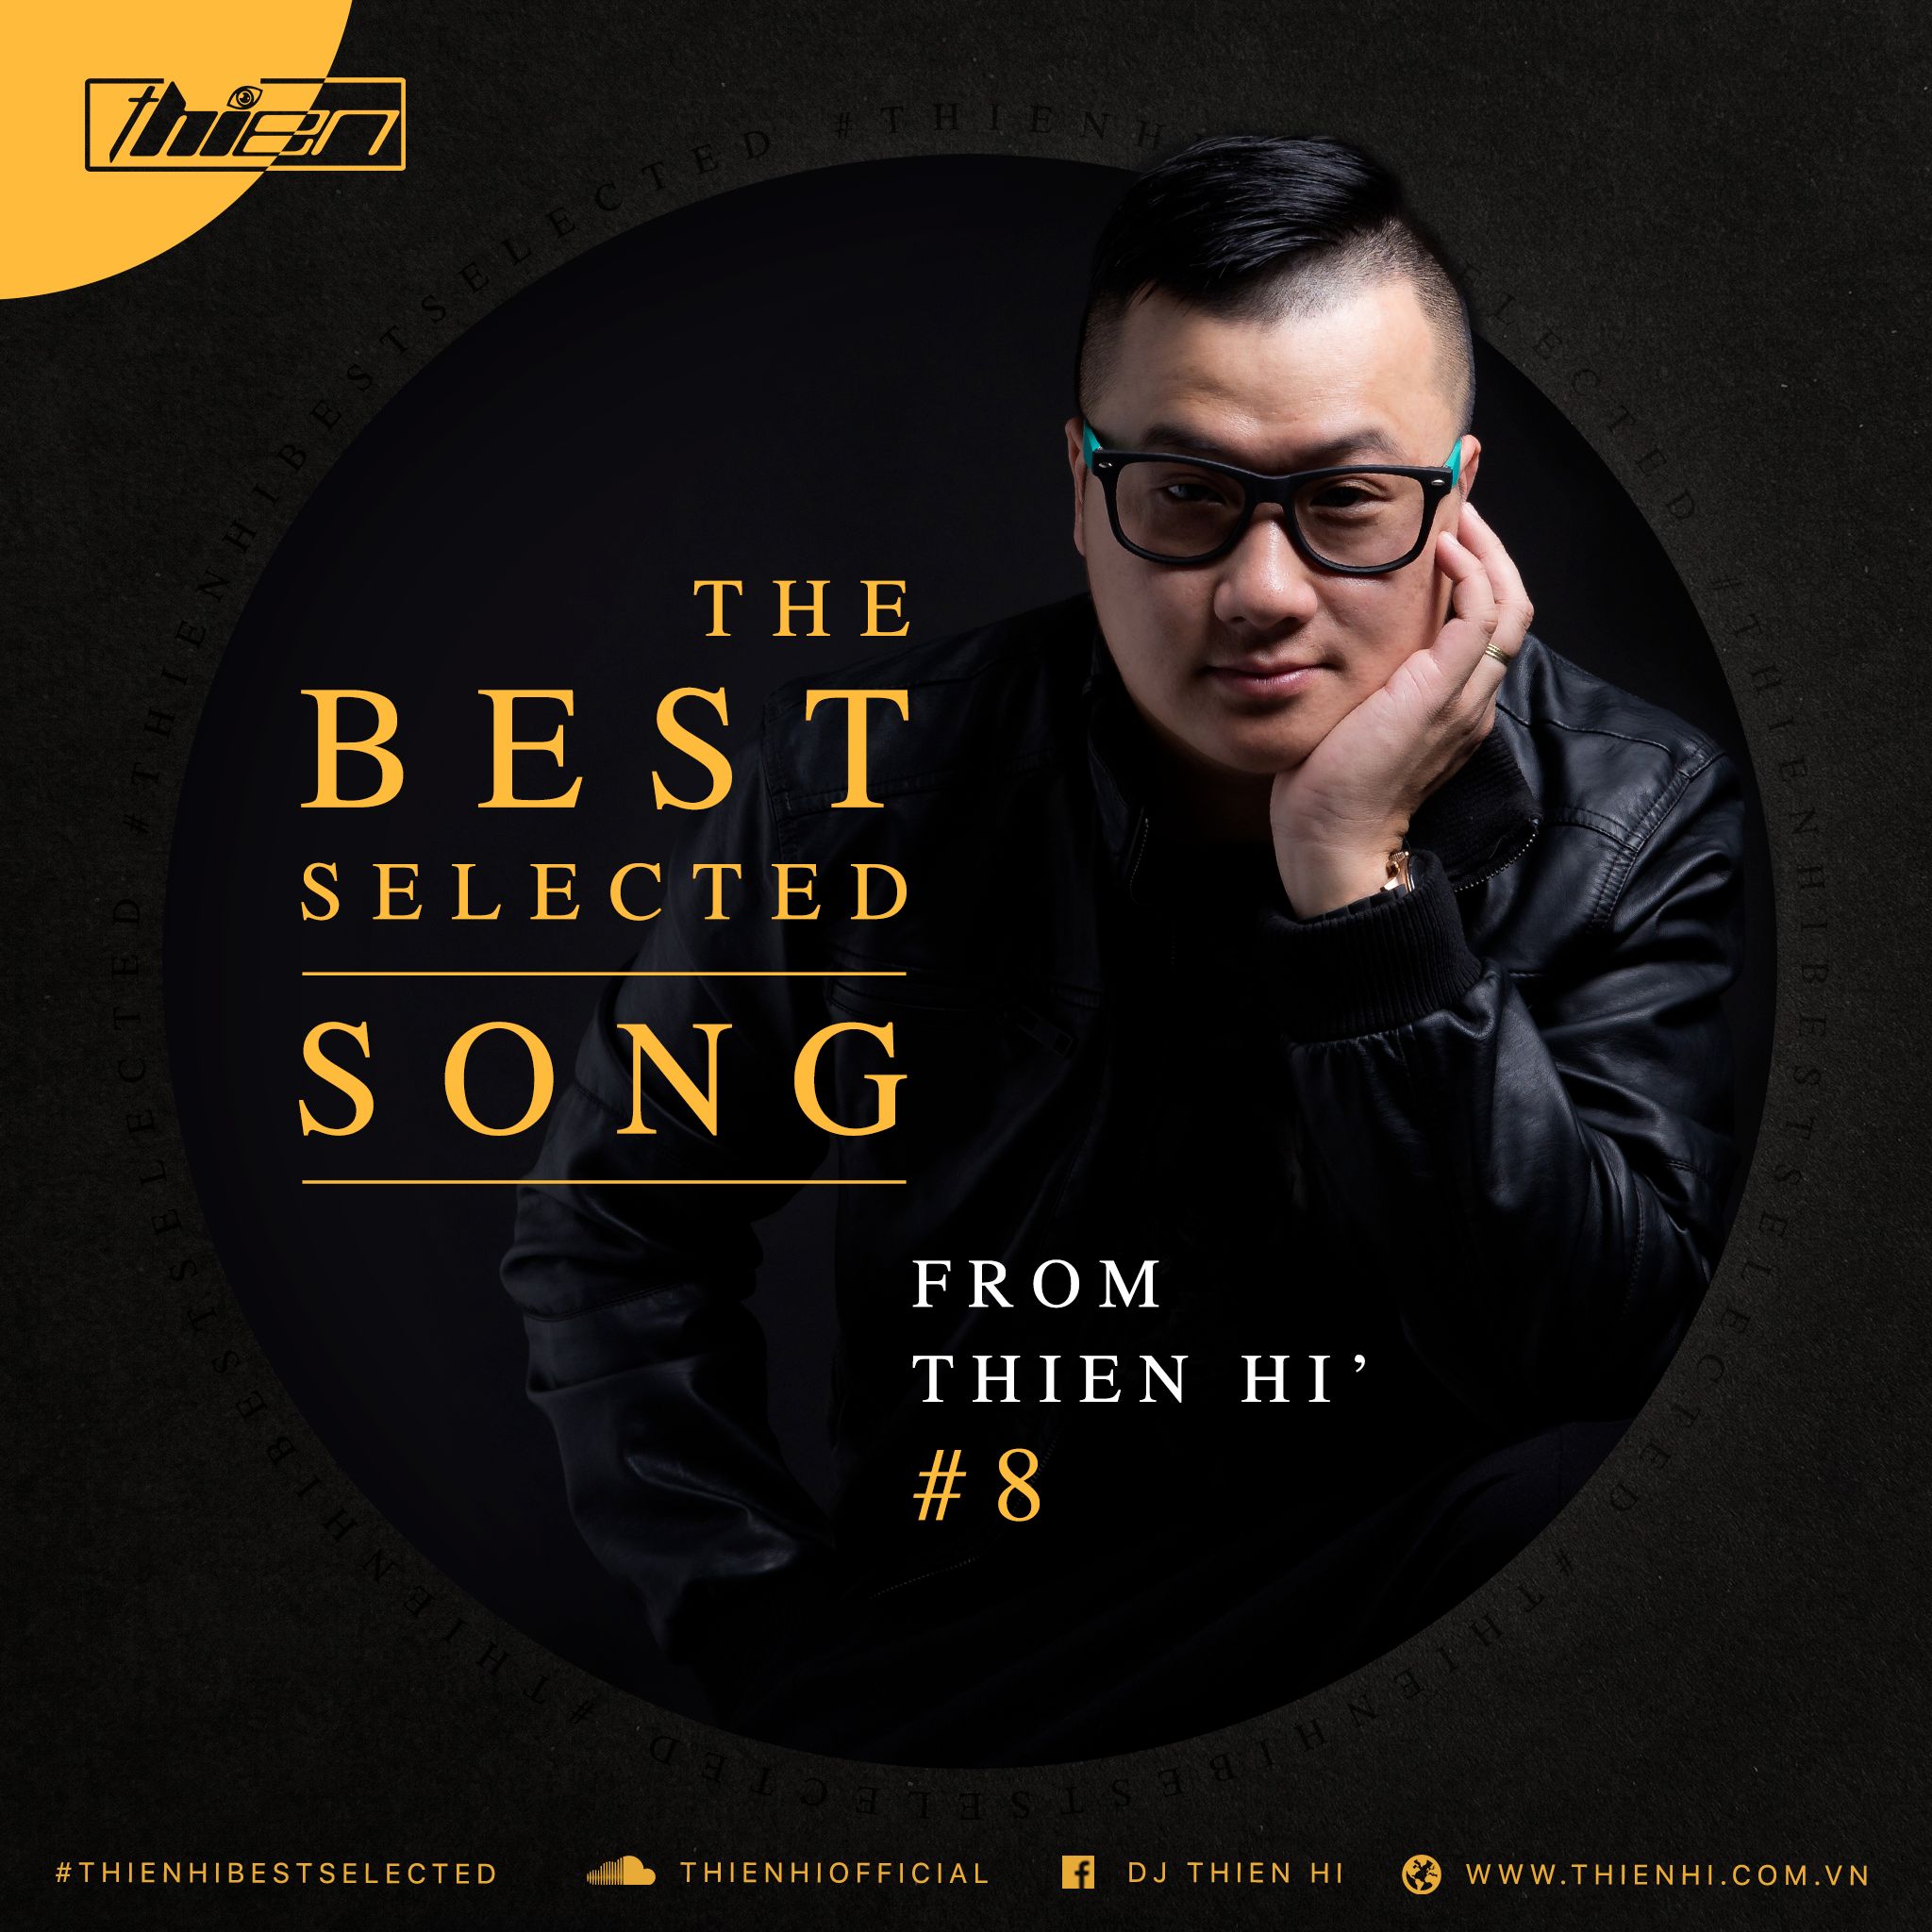 Budata Thien Hi - The Best Selected Song #8